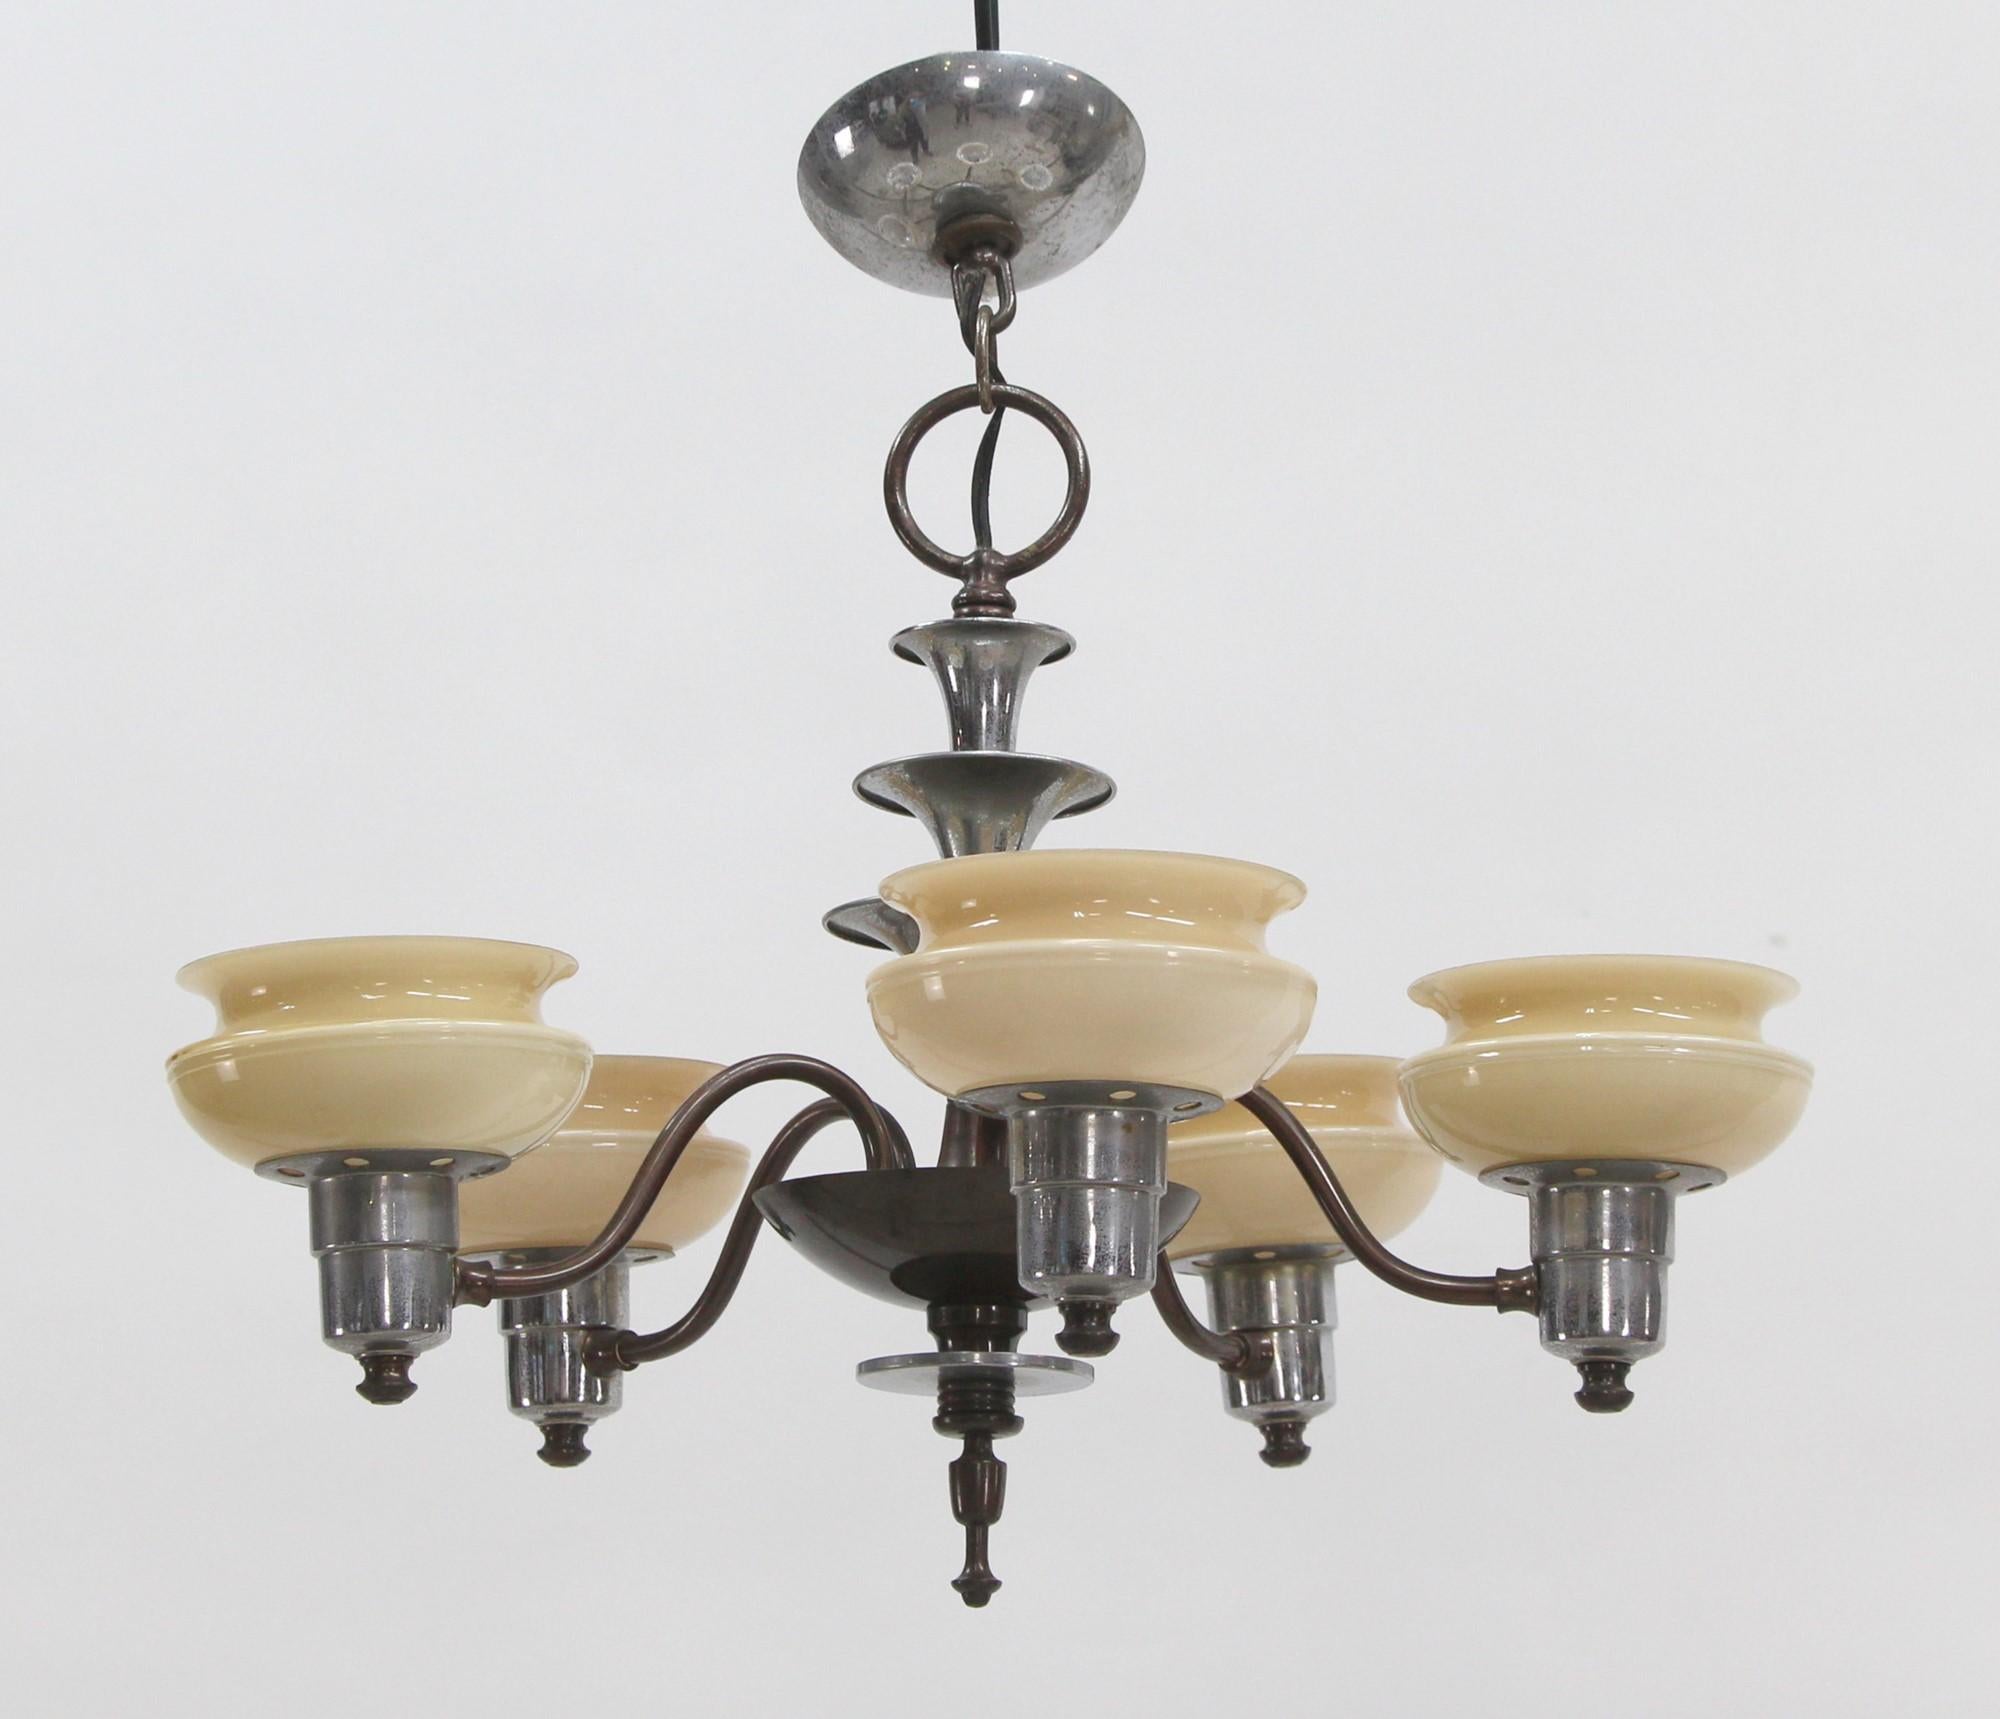 1930s Art Deco five light chandelier pendant with original custard shades. Brass details adorn a polished nickel frame. Cleaned and wired. Please note, this item is located in our Scranton, PA location.